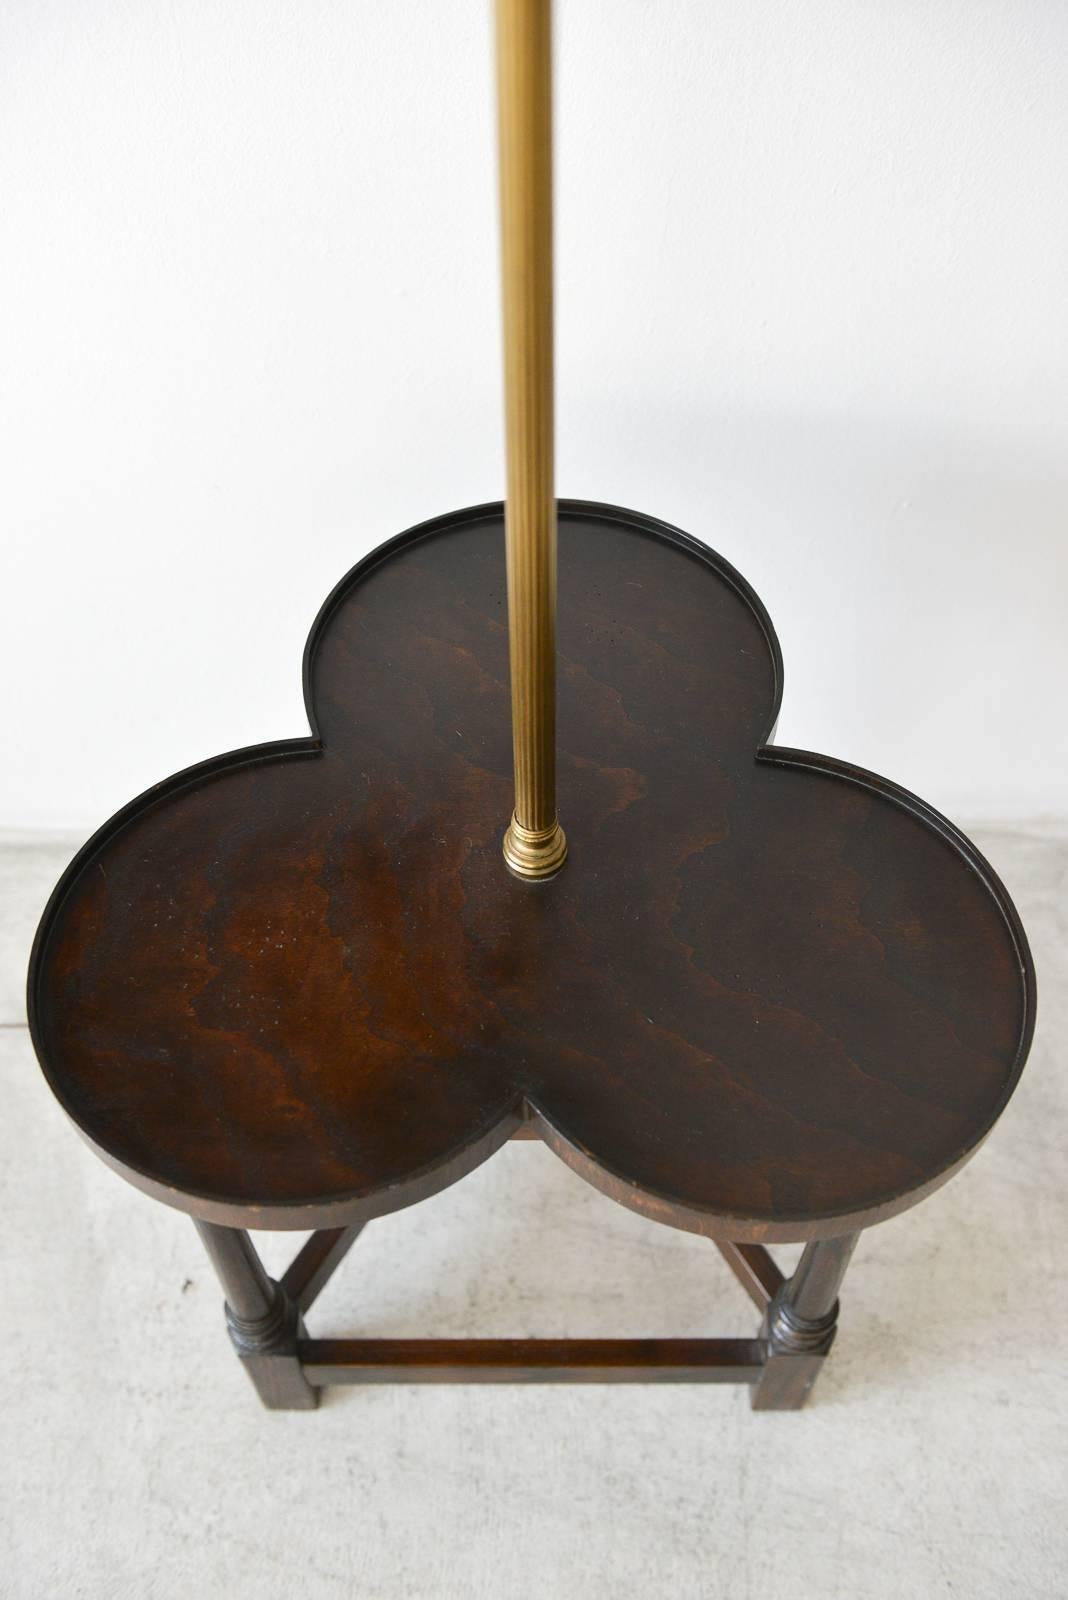 Tripod base clover floor lamp with table by Frederick Cooper, circa 1950. Beautiful rich wood with clover shaped table and tripod base. Decorative brass neck with original shade and brass finial. Original wiring, working condition with original